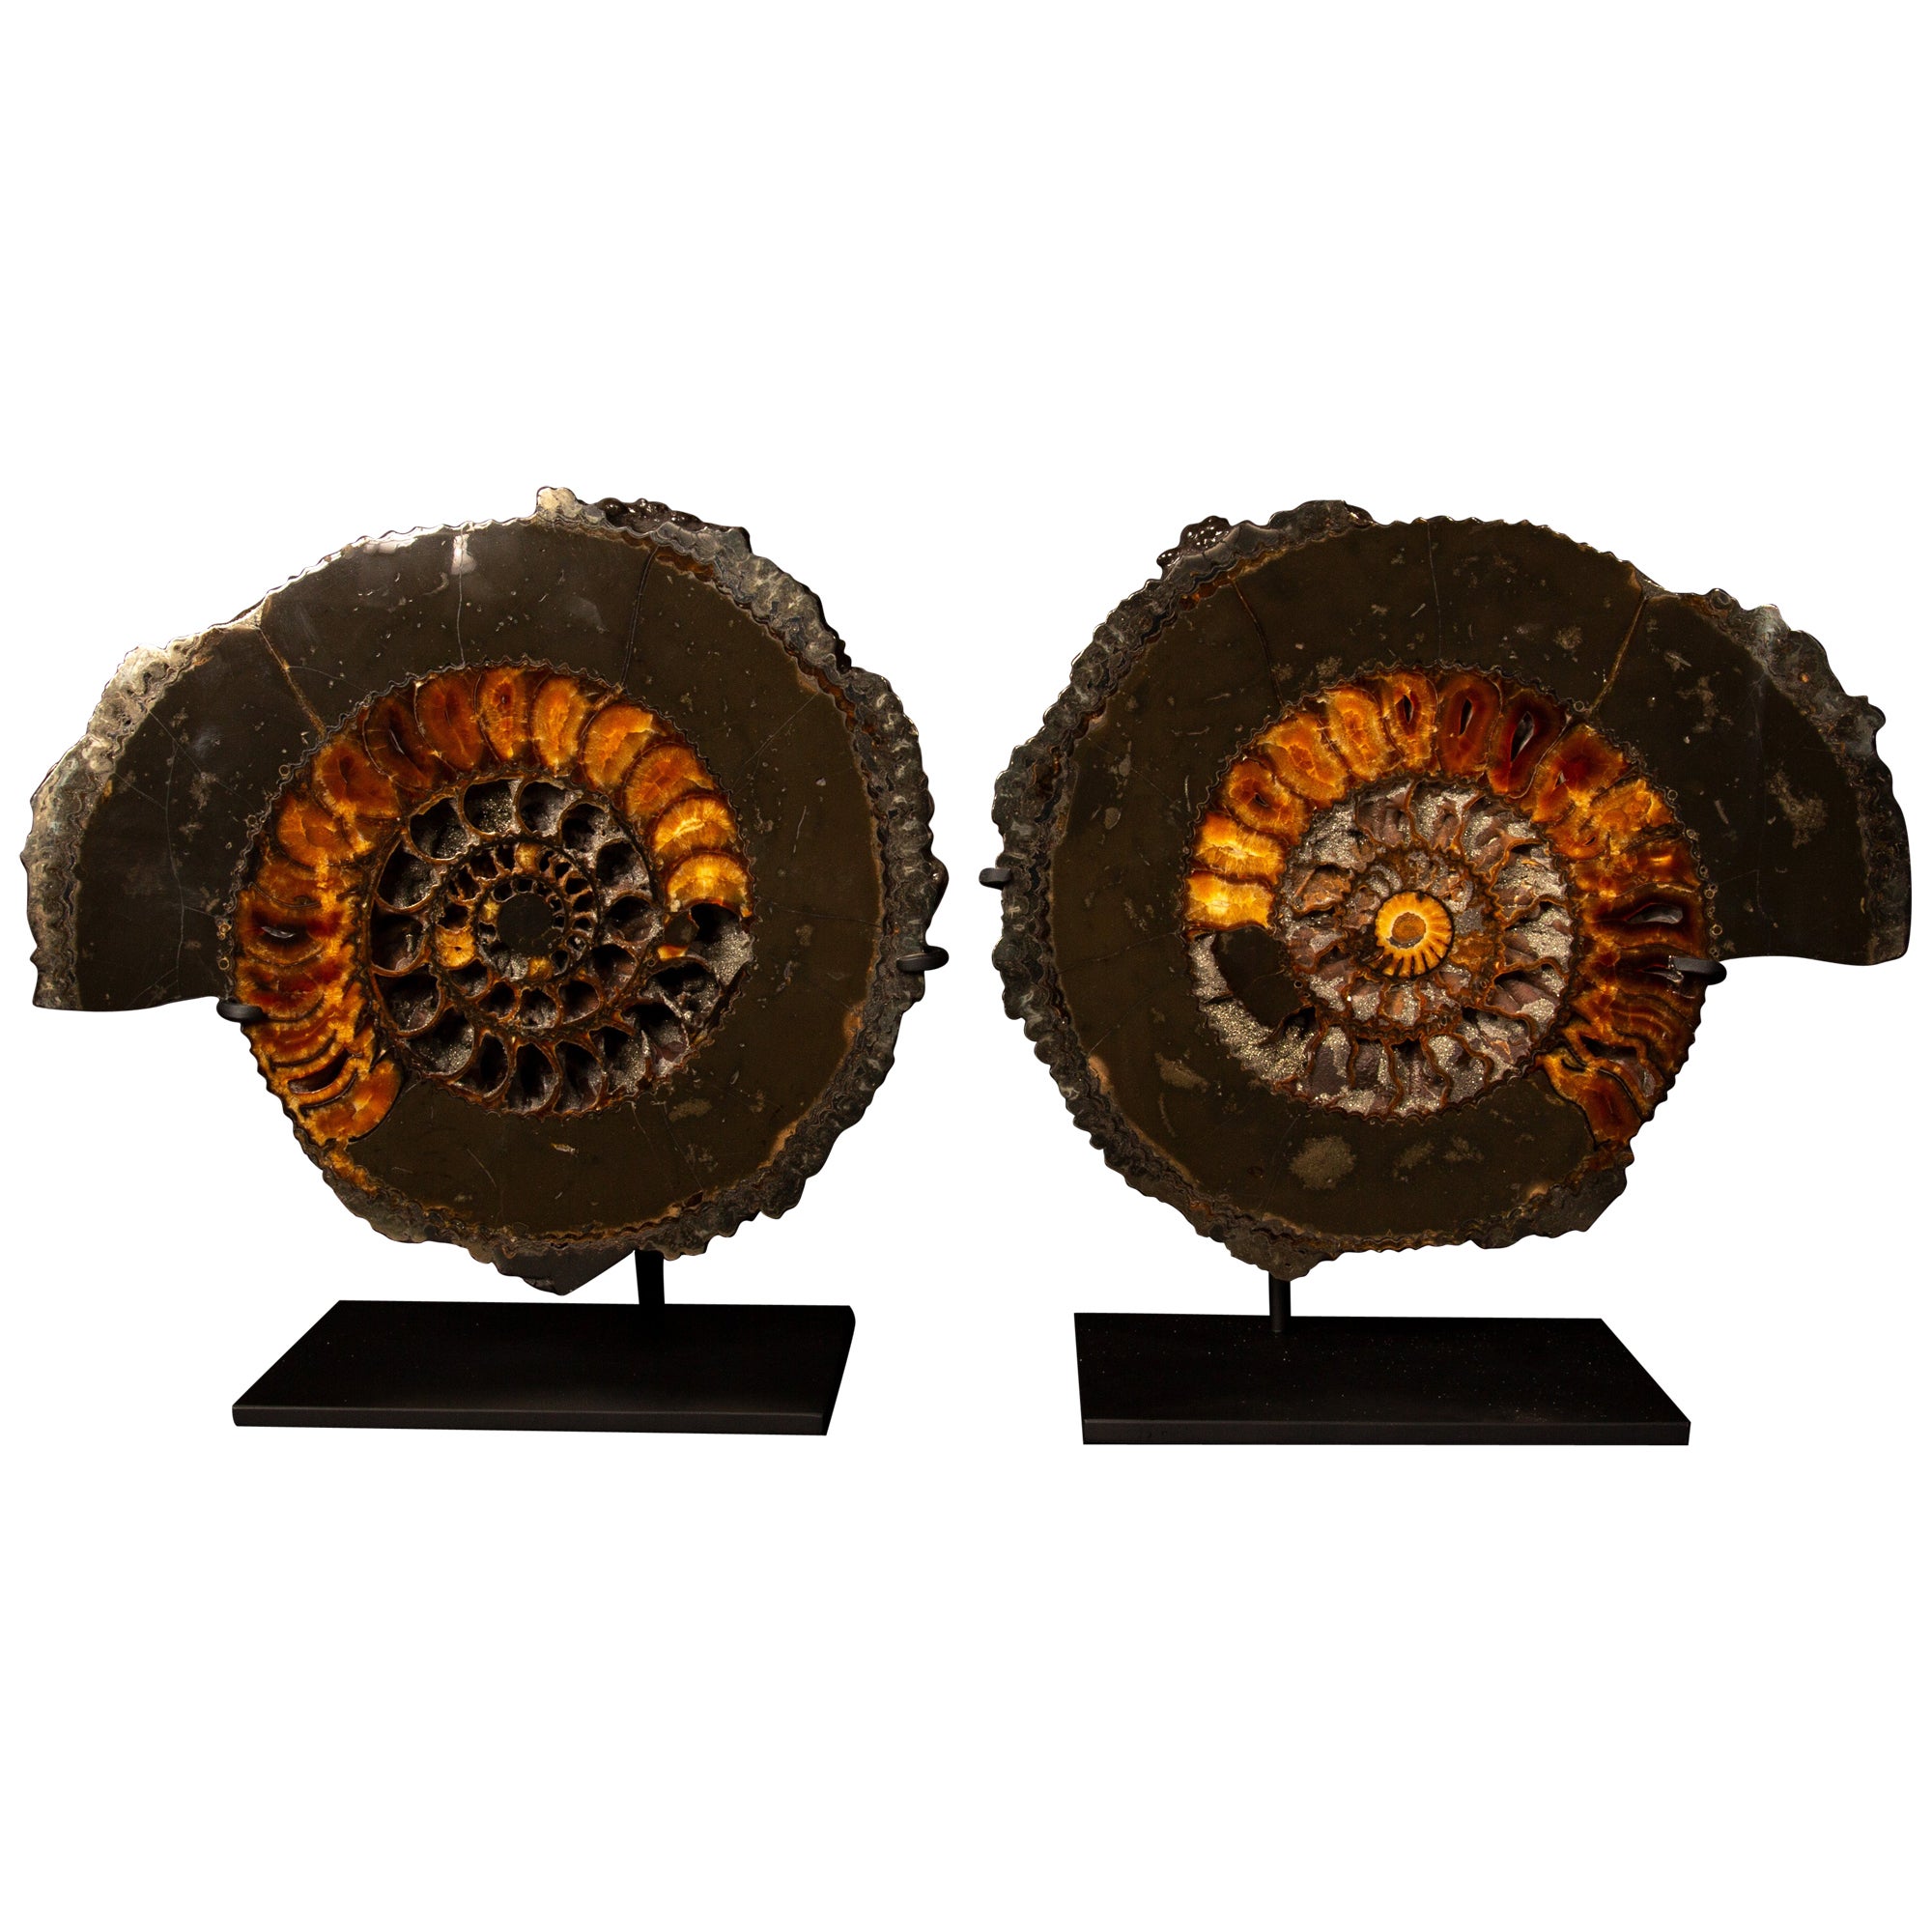 Exquisite Pyritized Ammonite Pair (Speetoniceras sp.) - Custom Mounted Display For Sale